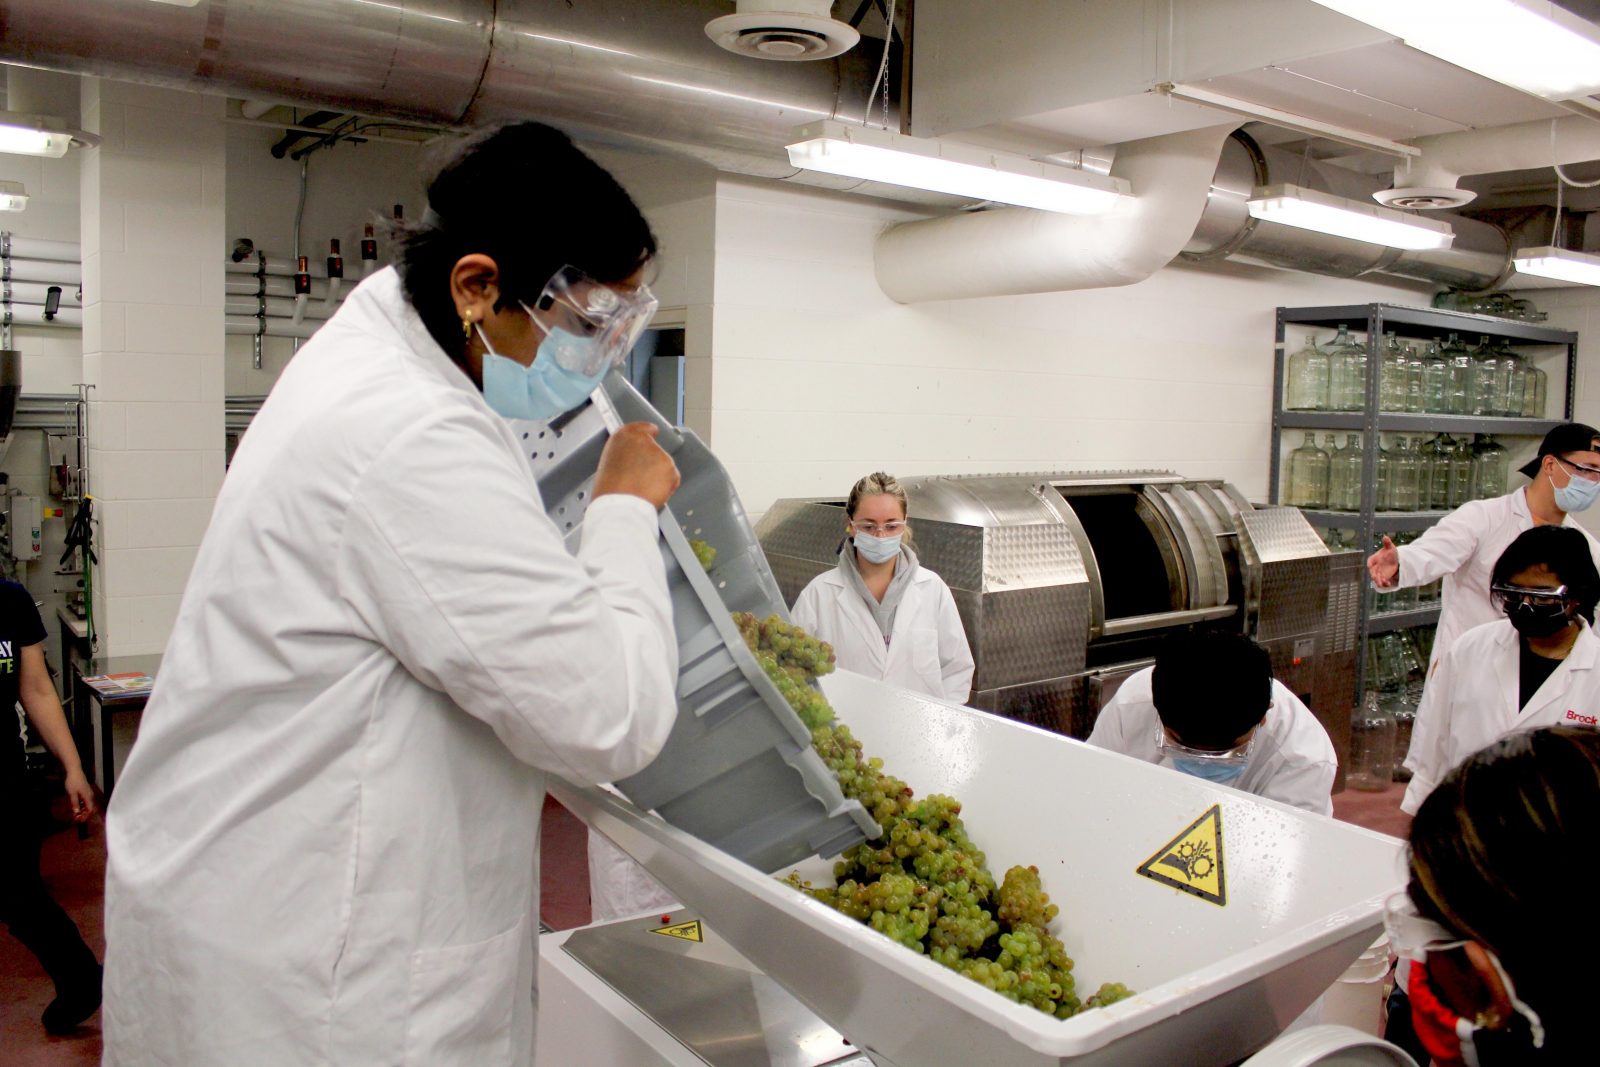 A group of students in lab coats and safety goggles use a grape crusher destemmer to process Riesling grapes.